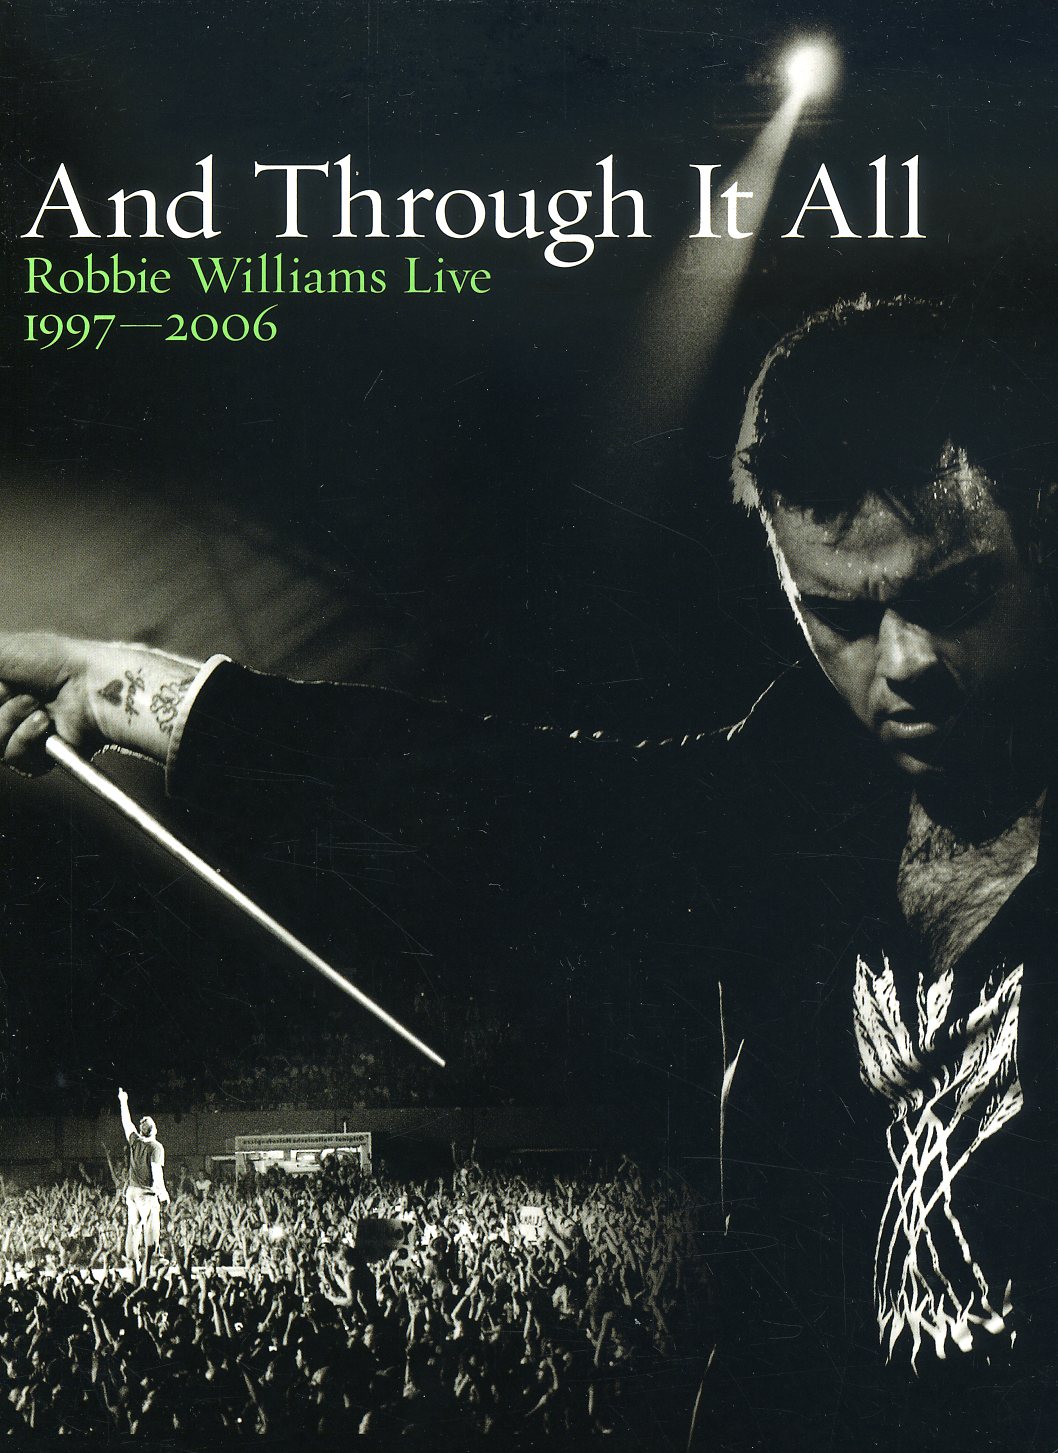 AND THROUGH IT ALL: ROBBIE WILLIAMS LIVE 1997-2006